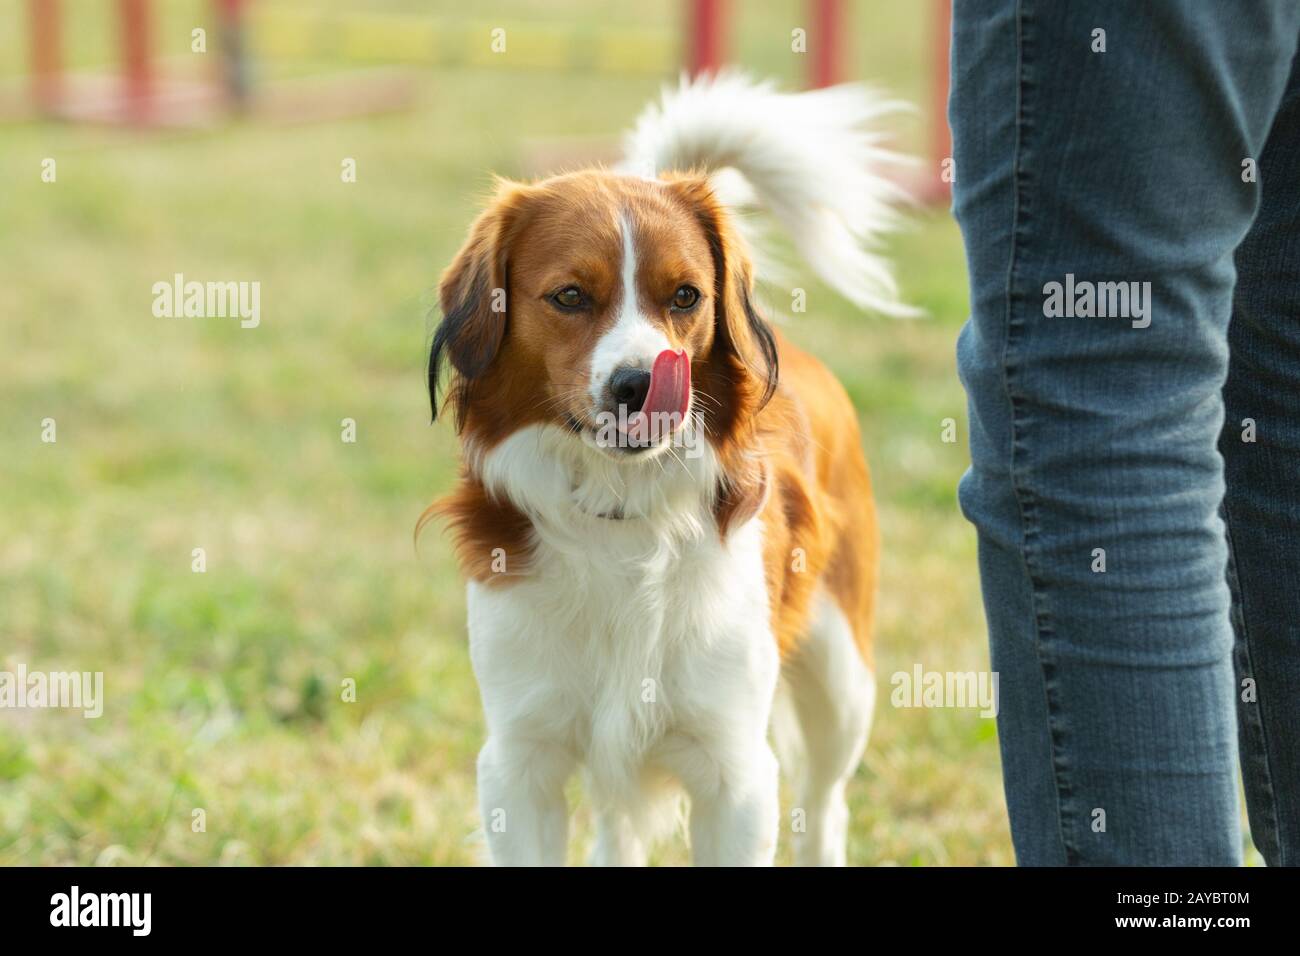 A young australian shepherd dog licking with his tongue over his nose at the dog school area. Stock Photo